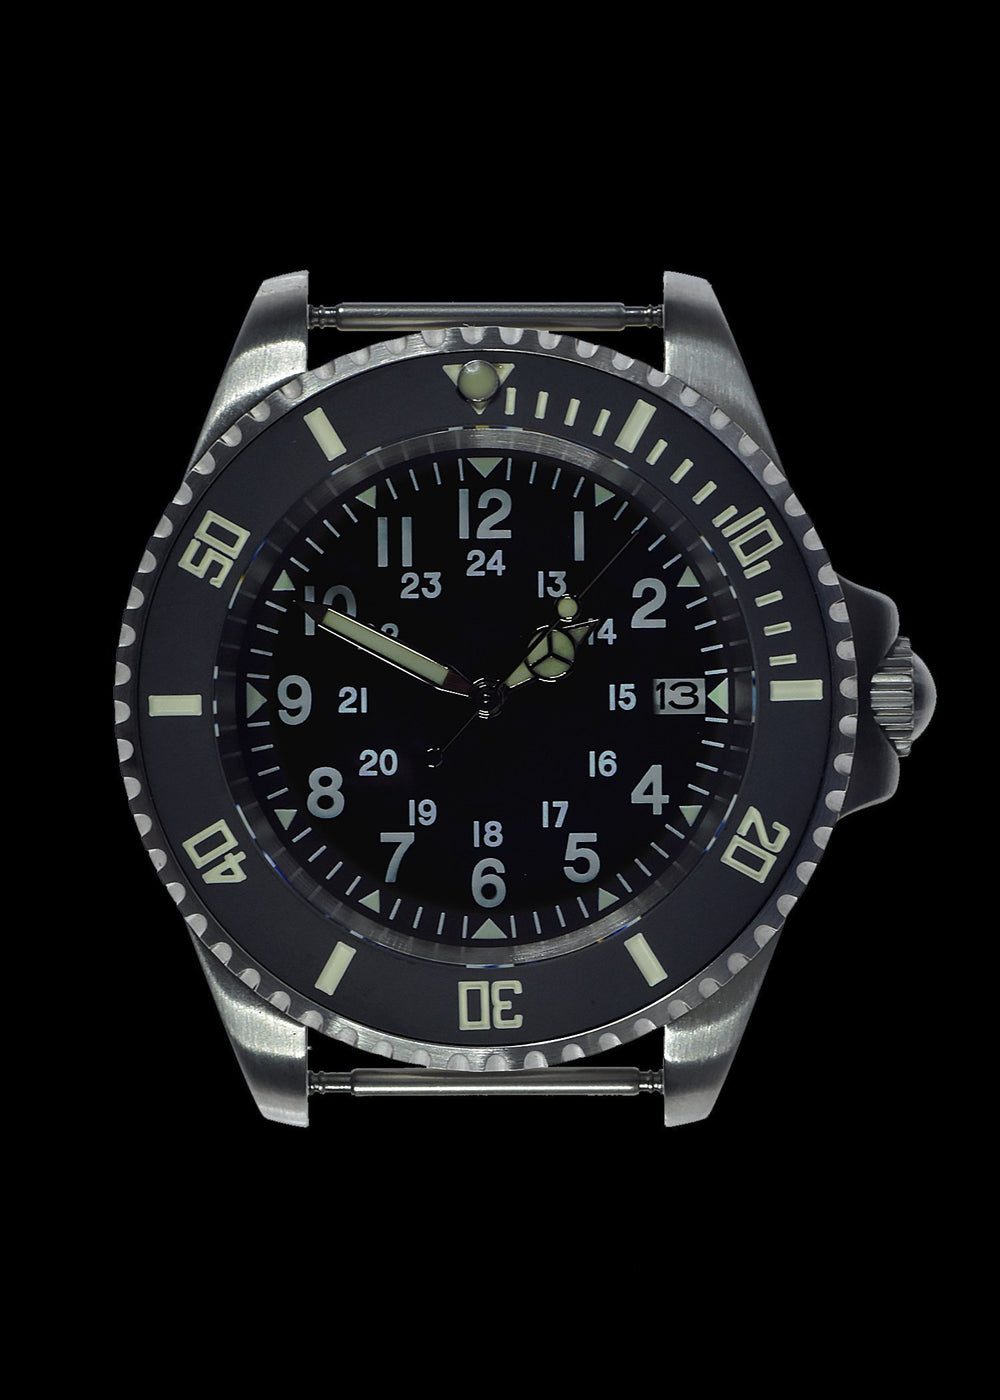 MWC Divers Watch - 24 Jewel U.S Pattern 300m Automatic Military Divers Watch, Sapphire Crystal, Ceramic Bezel on a NATO Webbing Strap